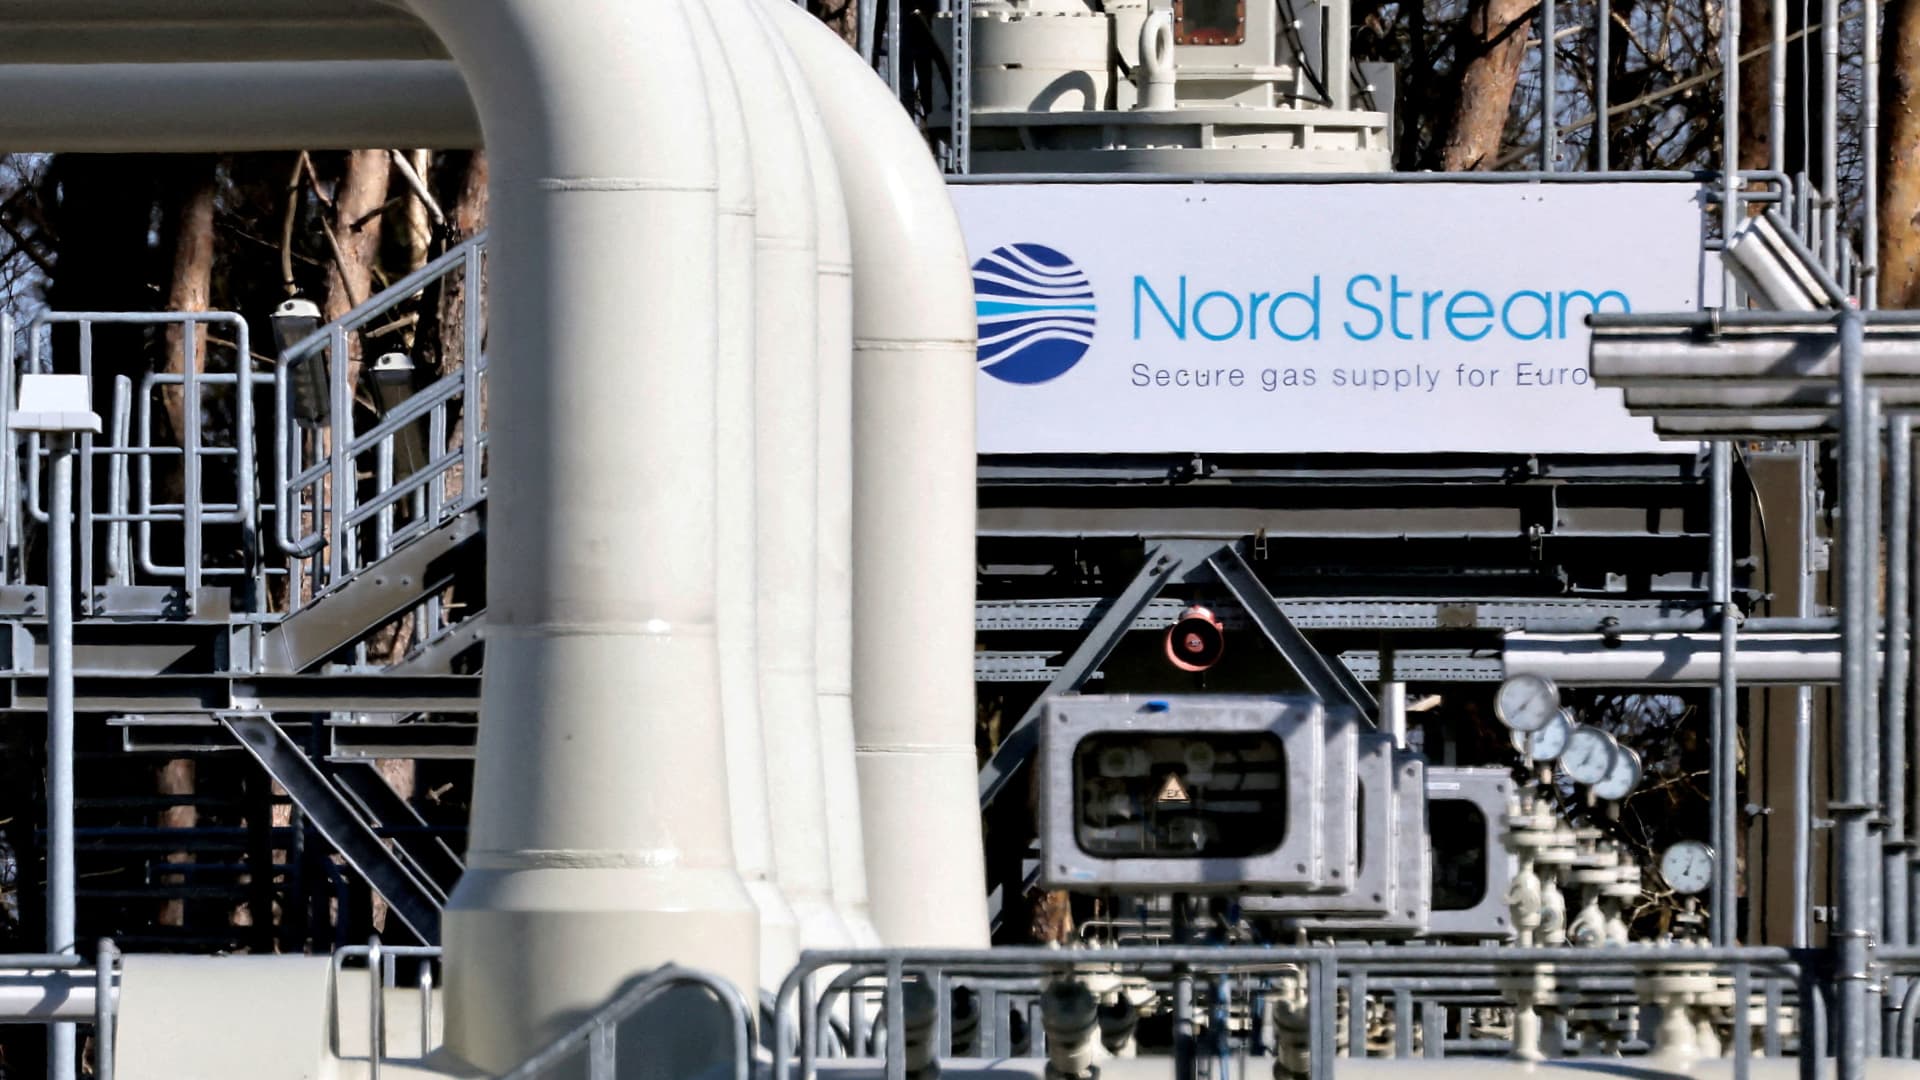 Nord Stream 1 provider said gas flows have resumed after maintenance works.